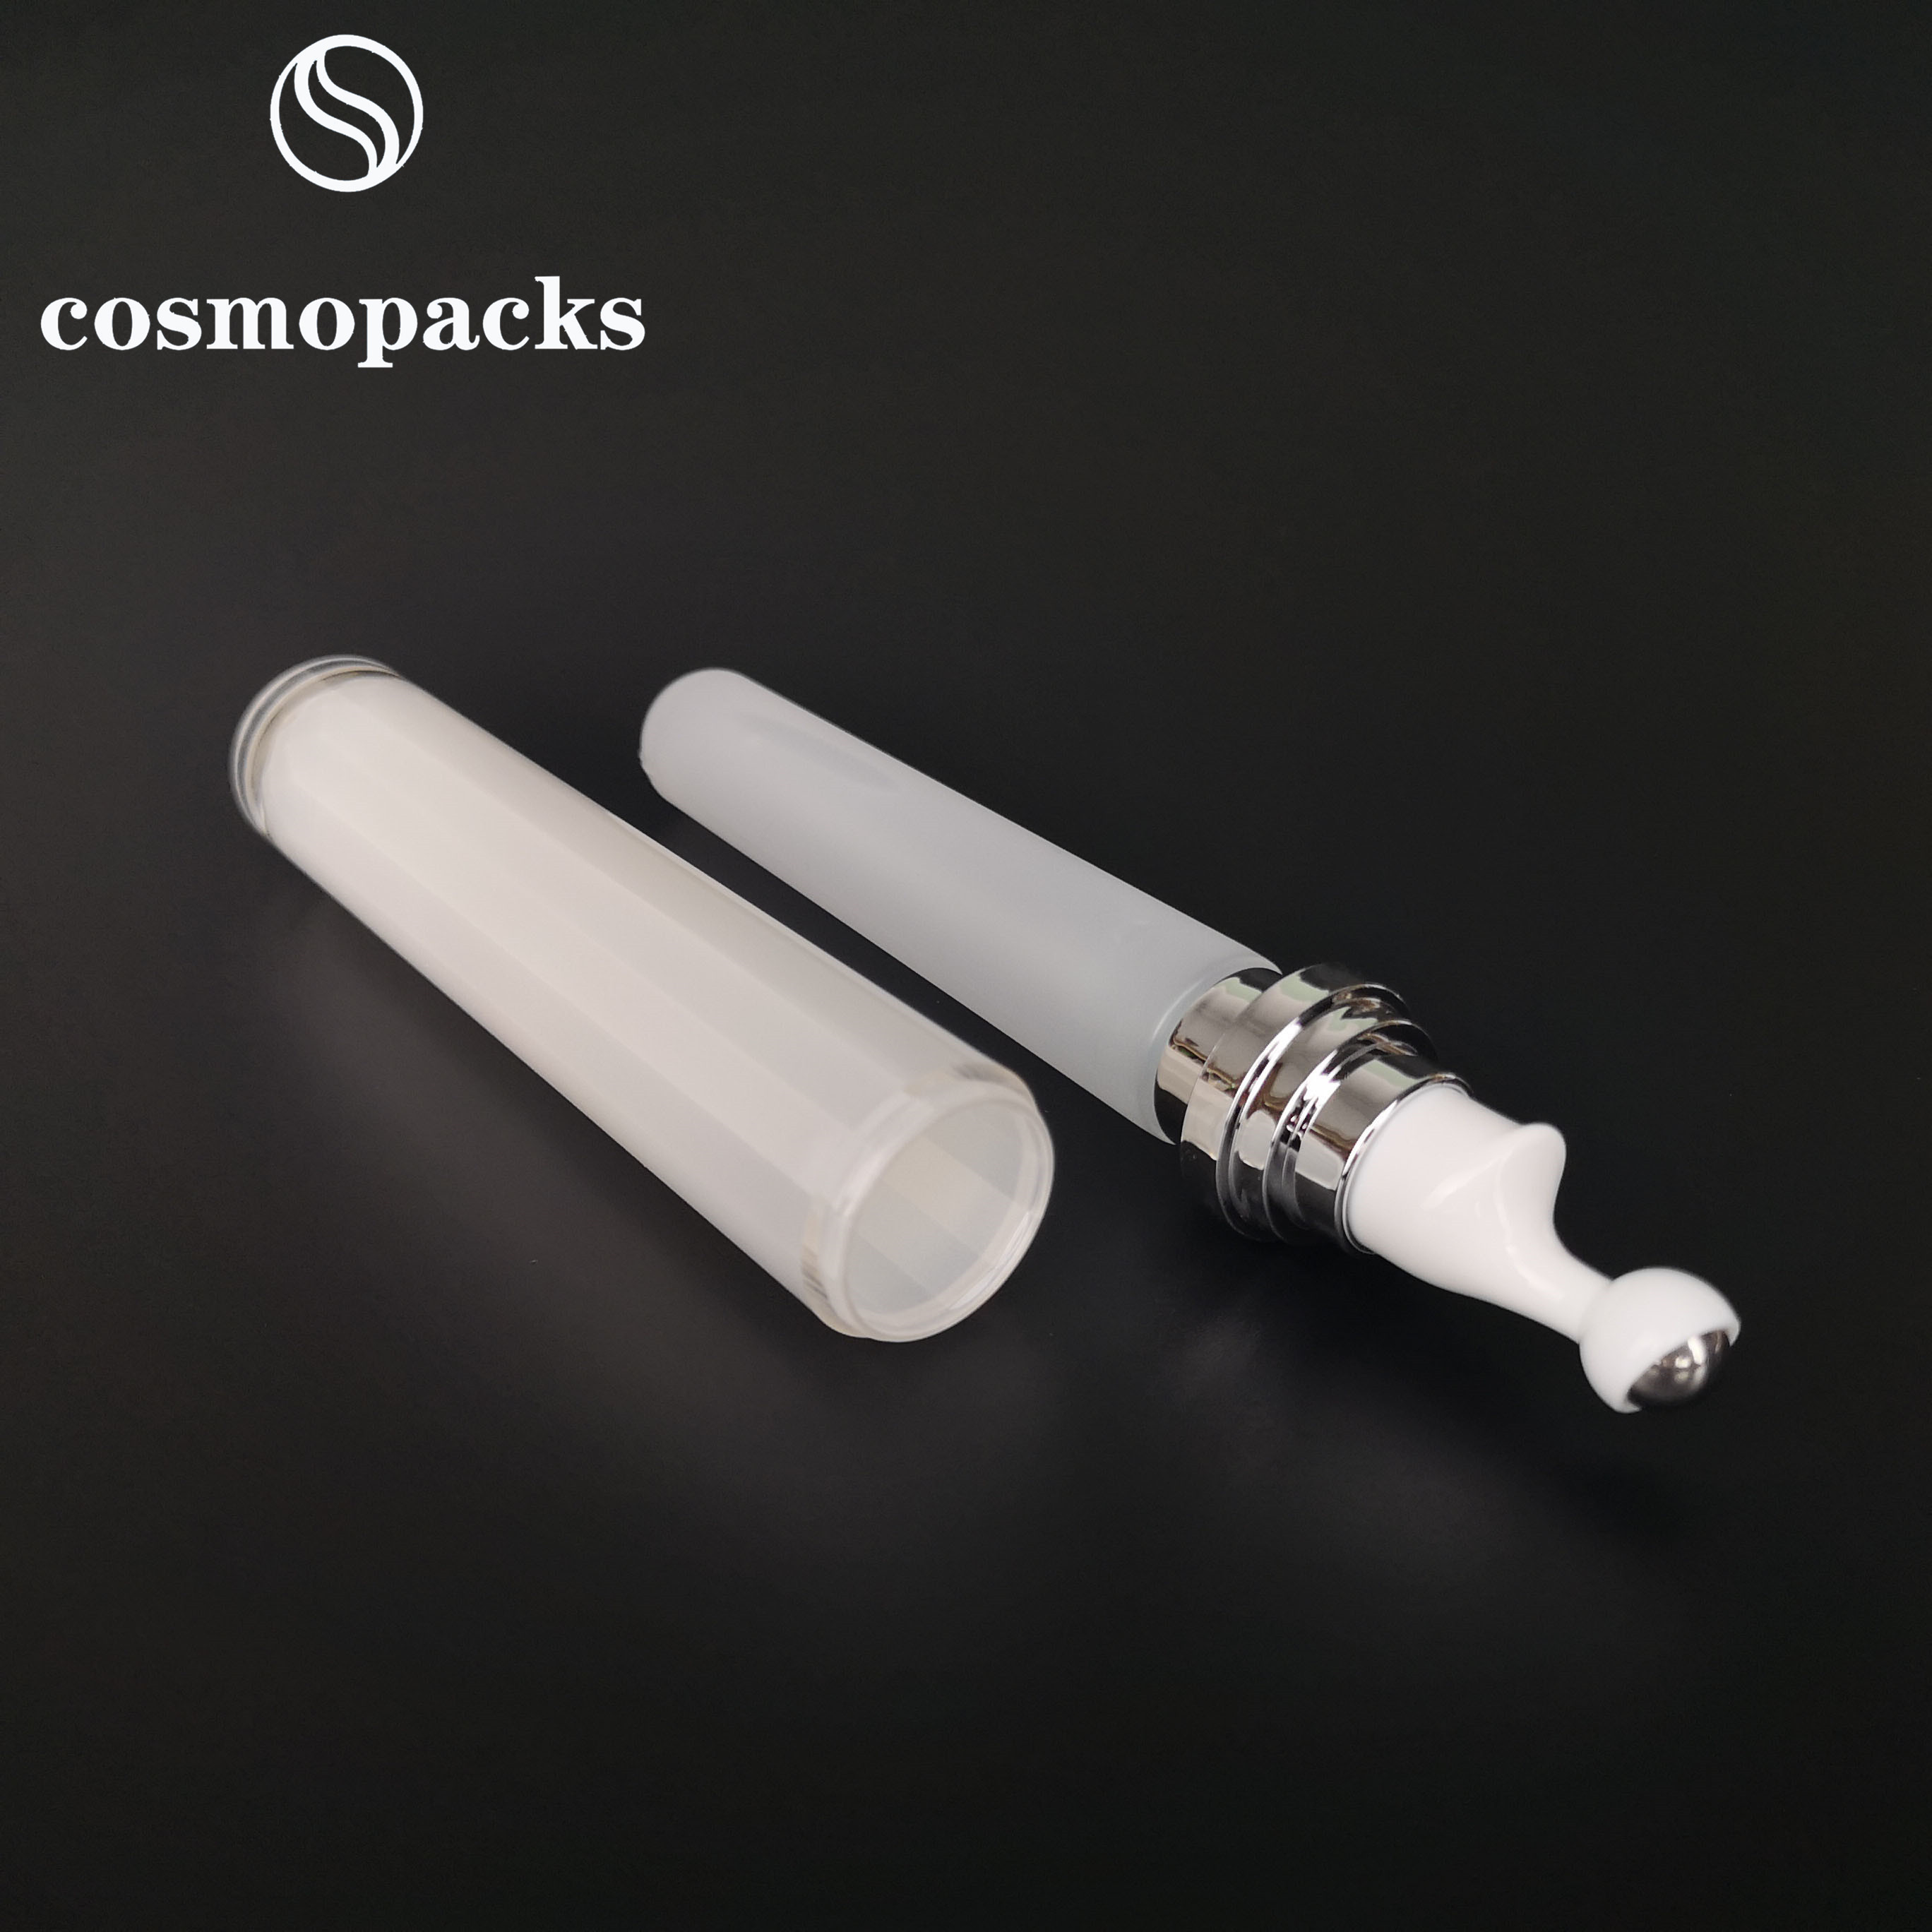 Quality Acrylic Serum Roller Airless Cosmetic Bottles Creamy White for sale